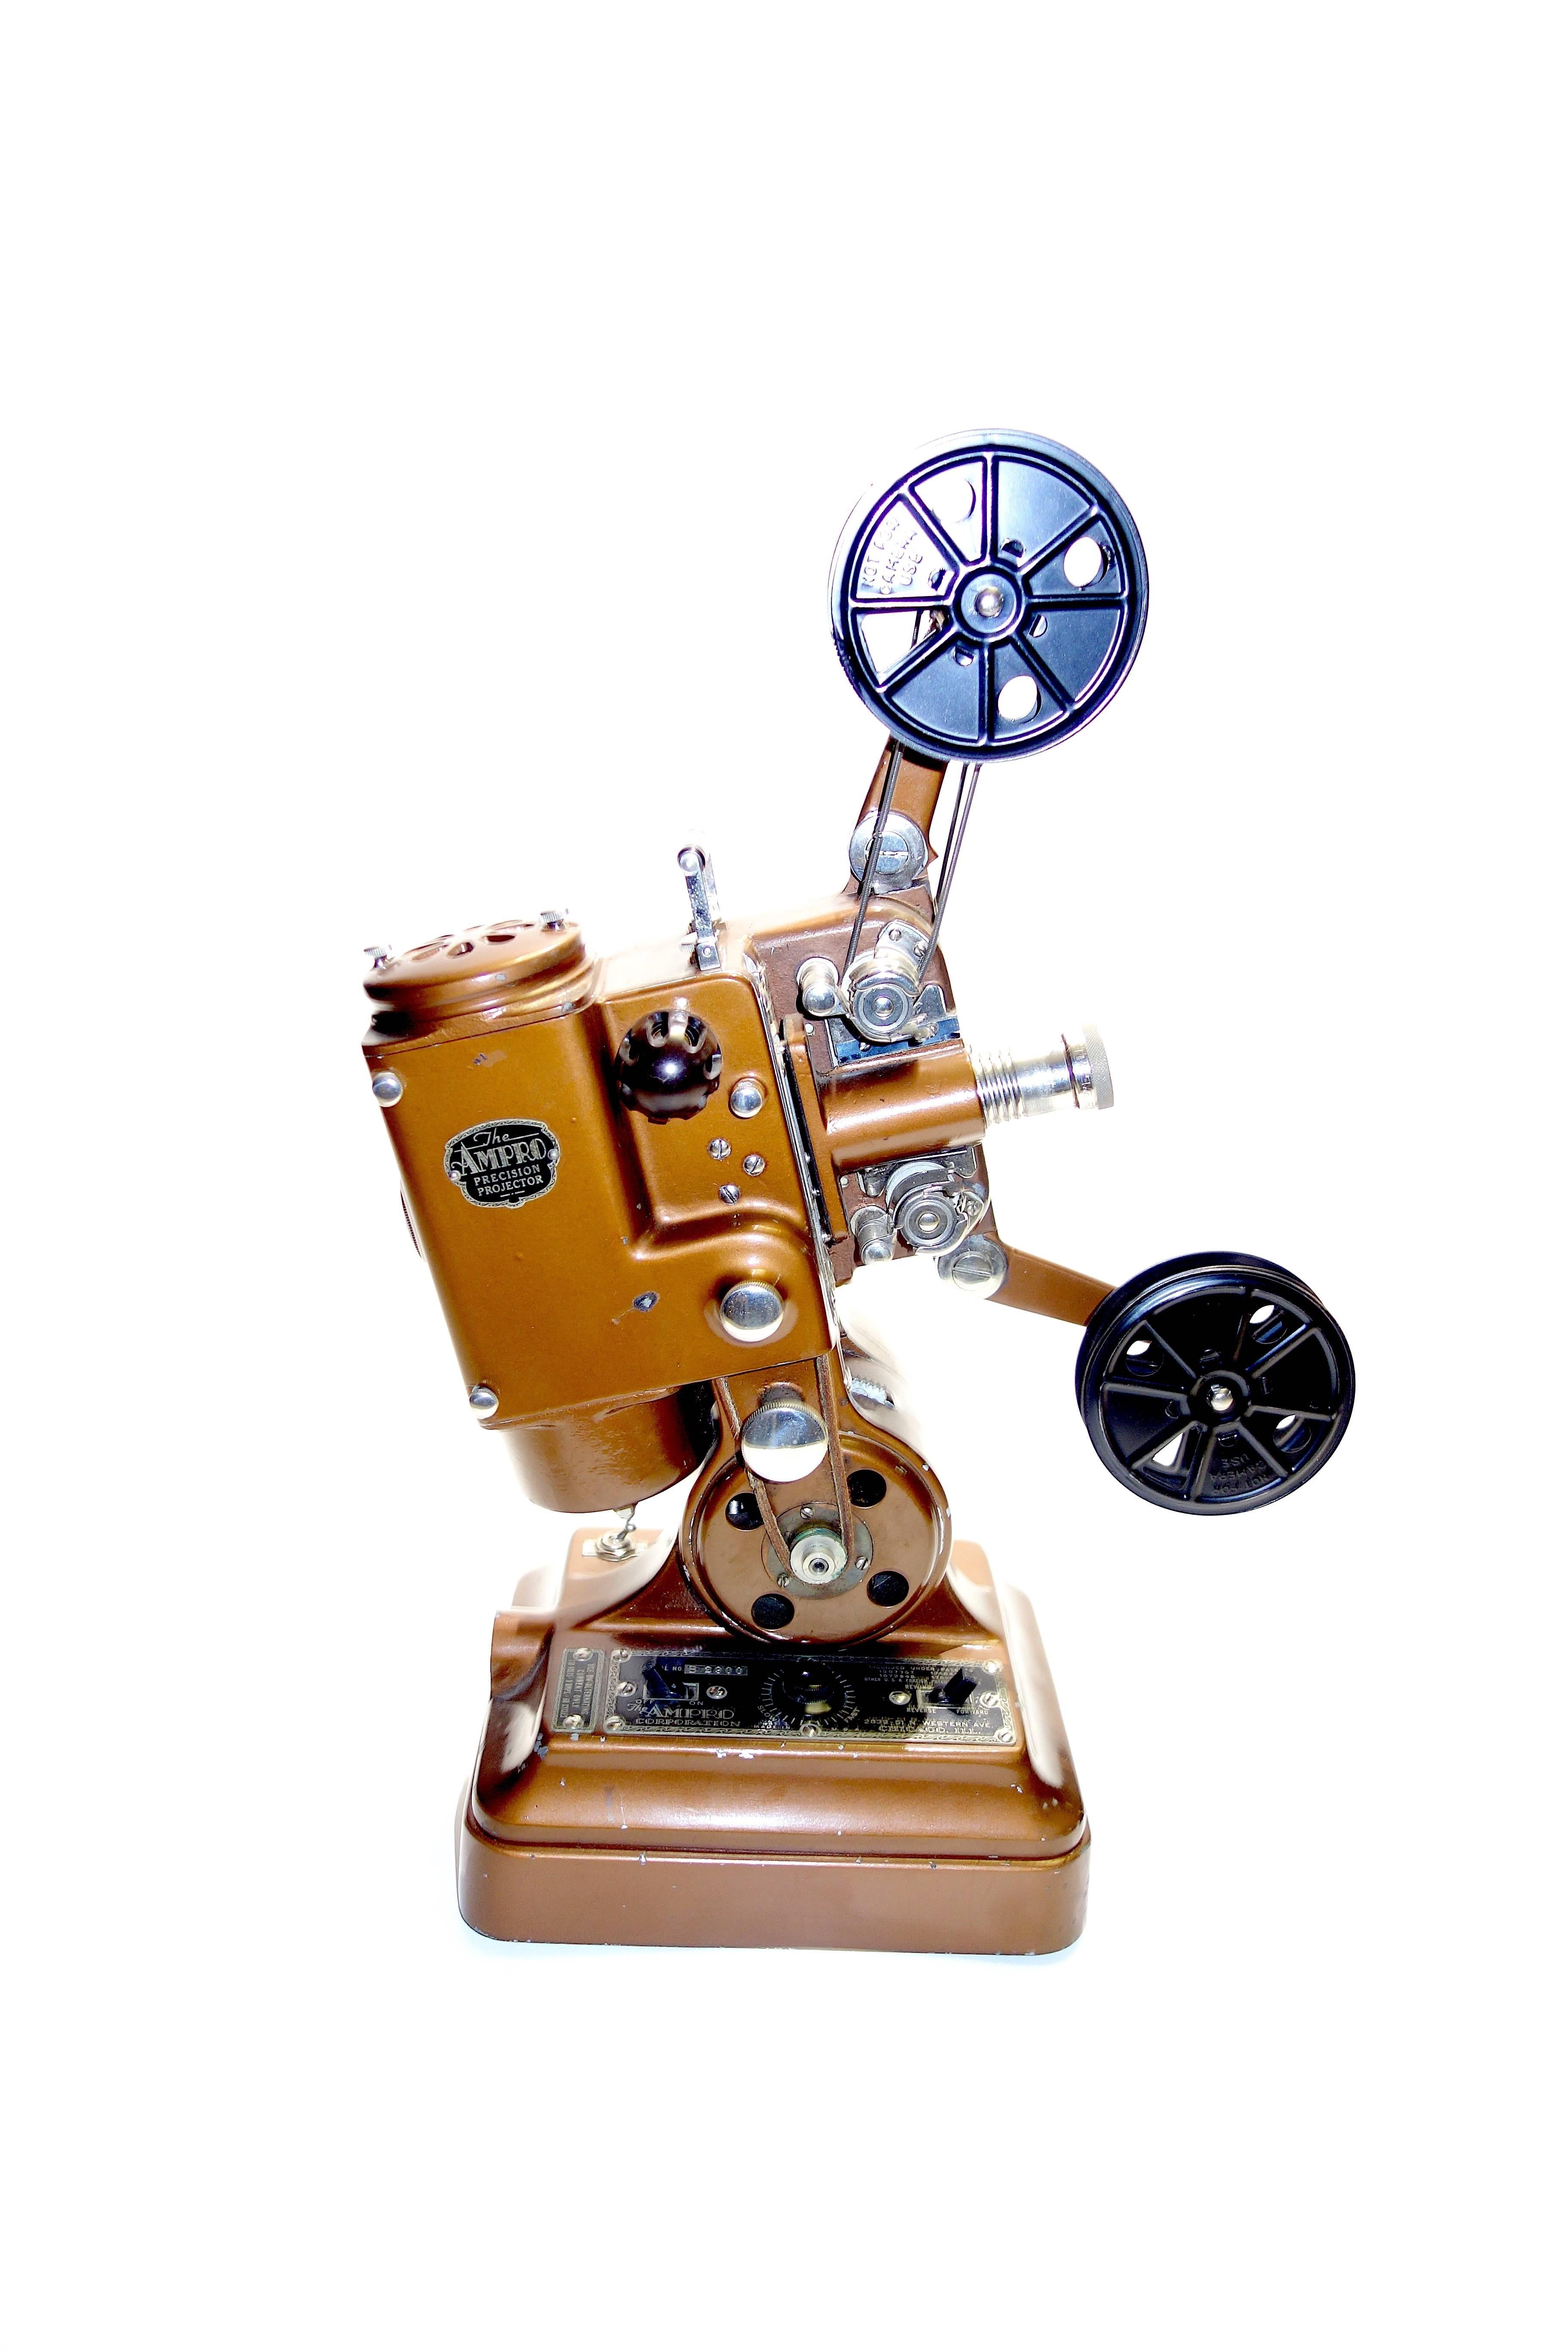 Submitted for your approval this circa 1930 Ampro Precision 400, 16mm cinema projector.
A wonderful working display of a beautiful Art Deco design. All original finish with accessories. This is a rare version with both chrome knob finishes and a